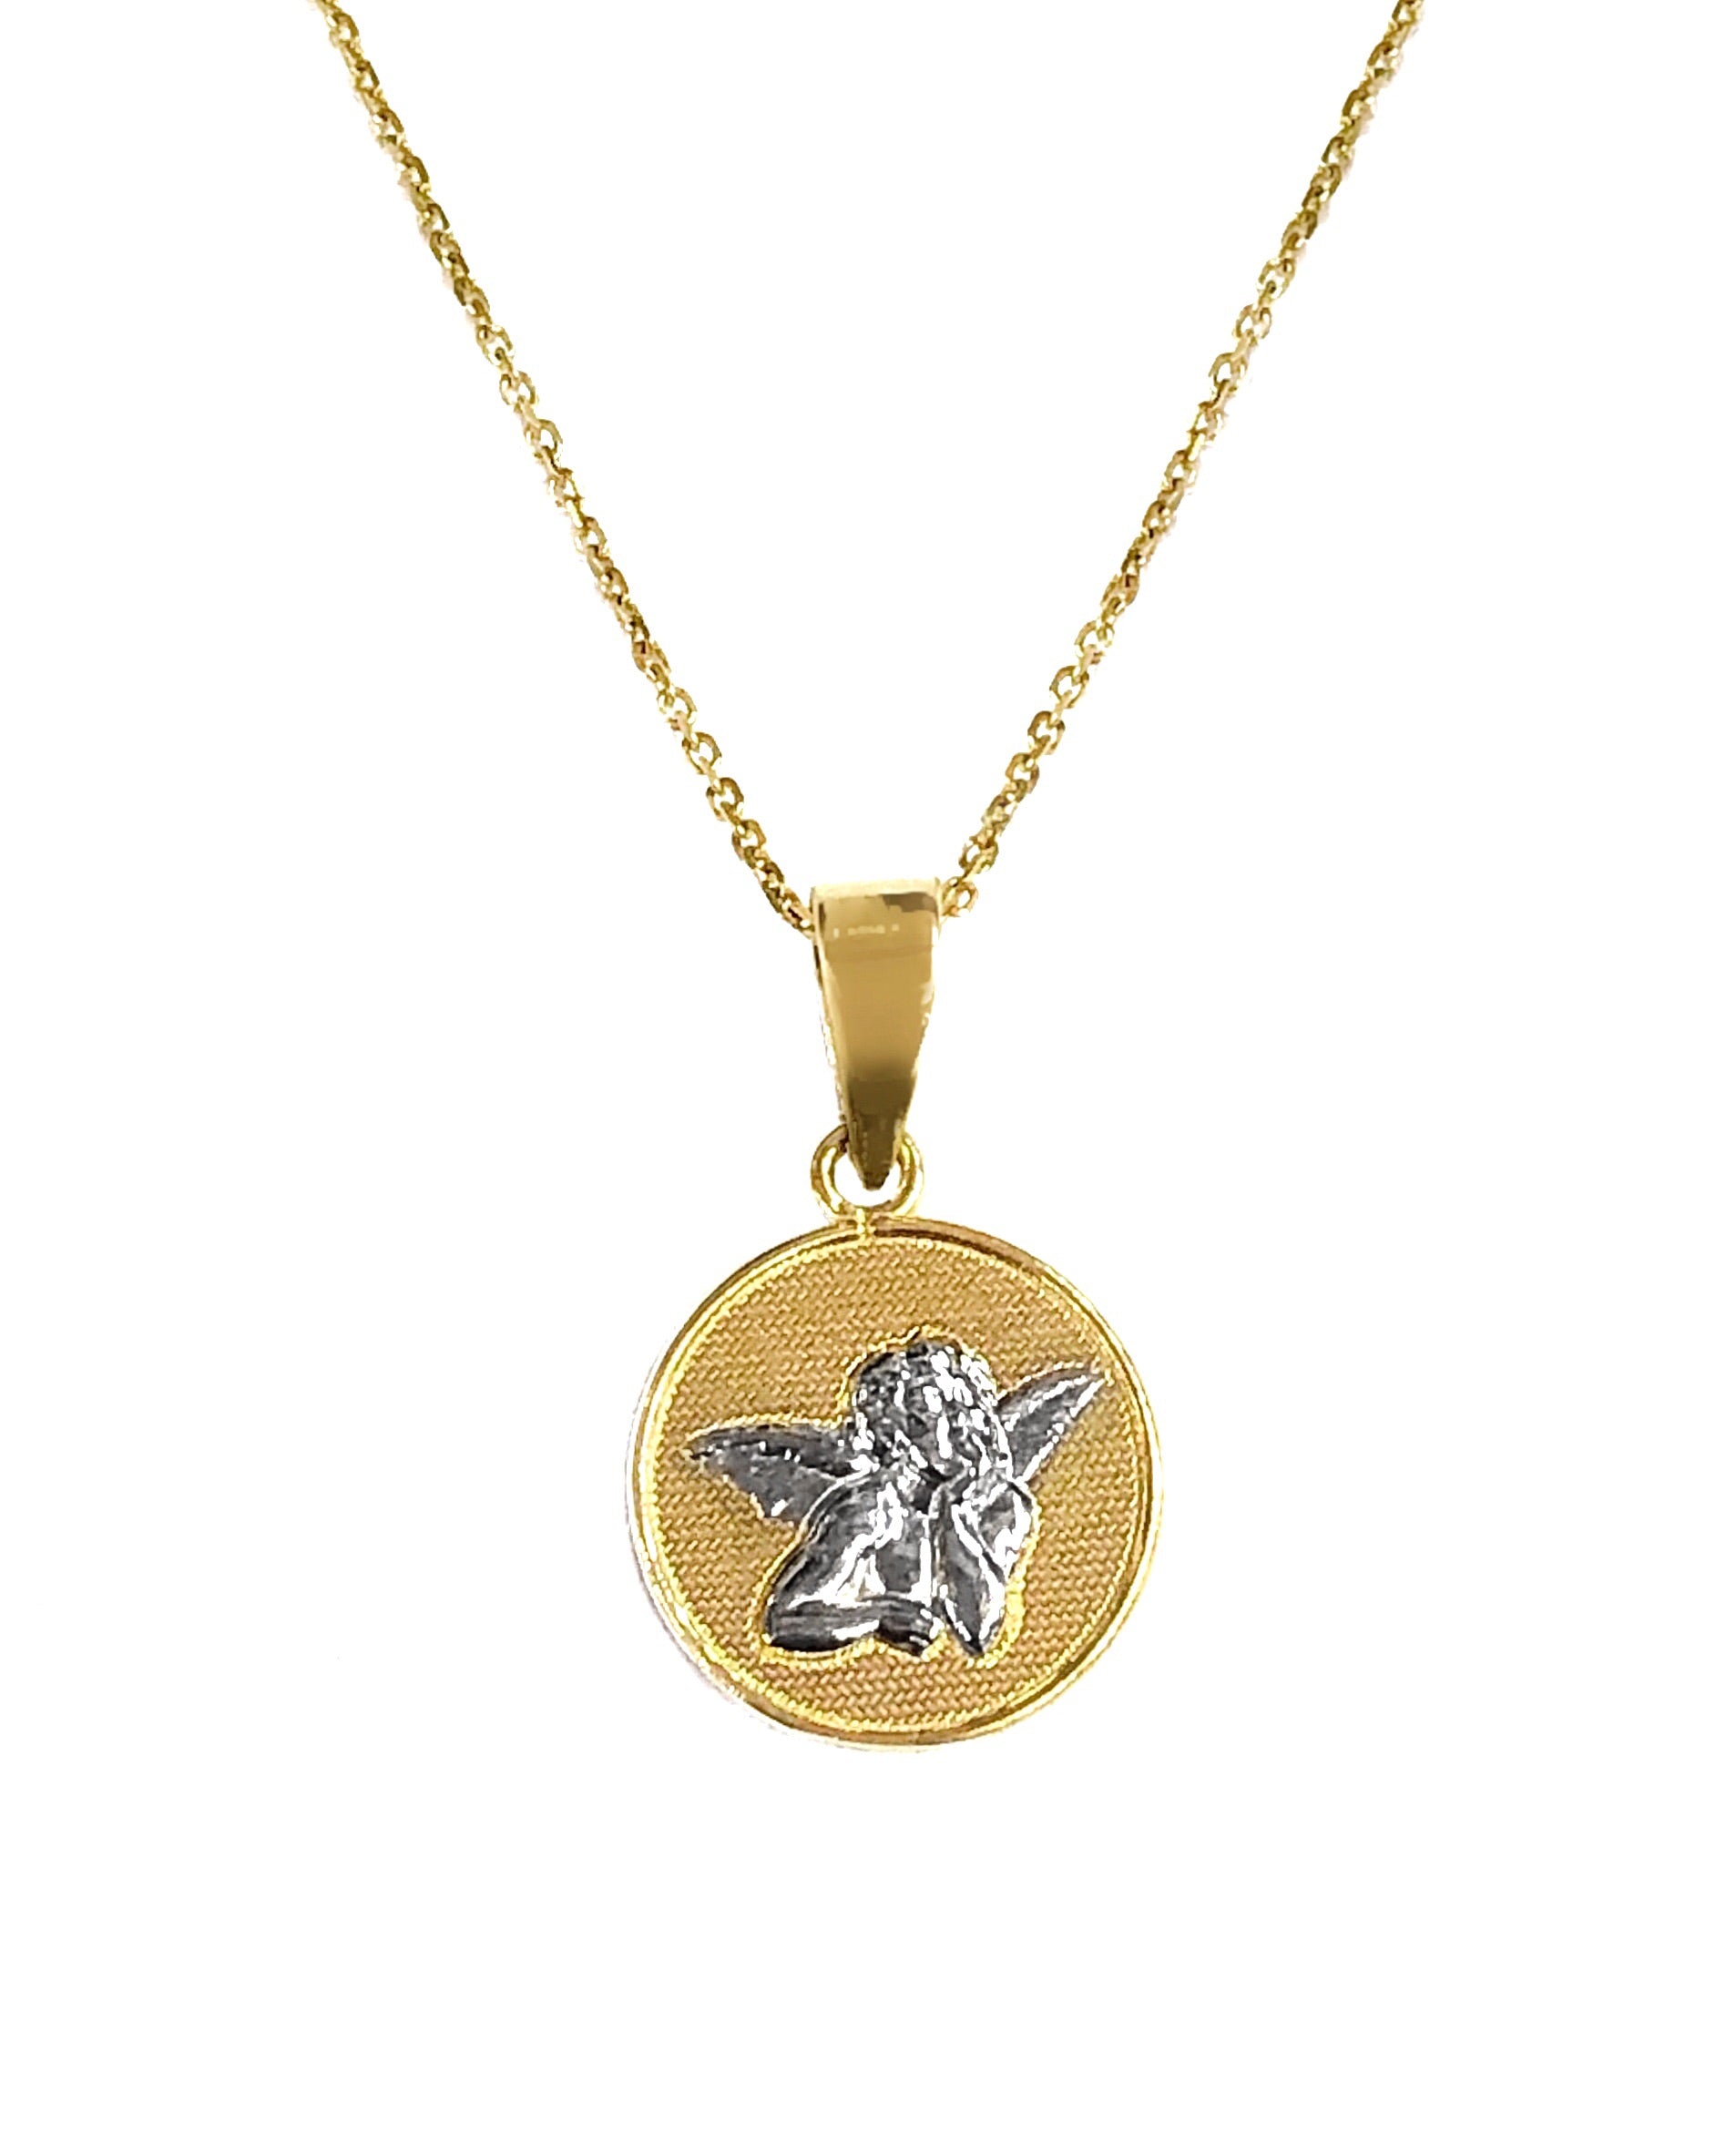 14K YELLOW GOLD CHERUB NECKLACE -TWO TONED